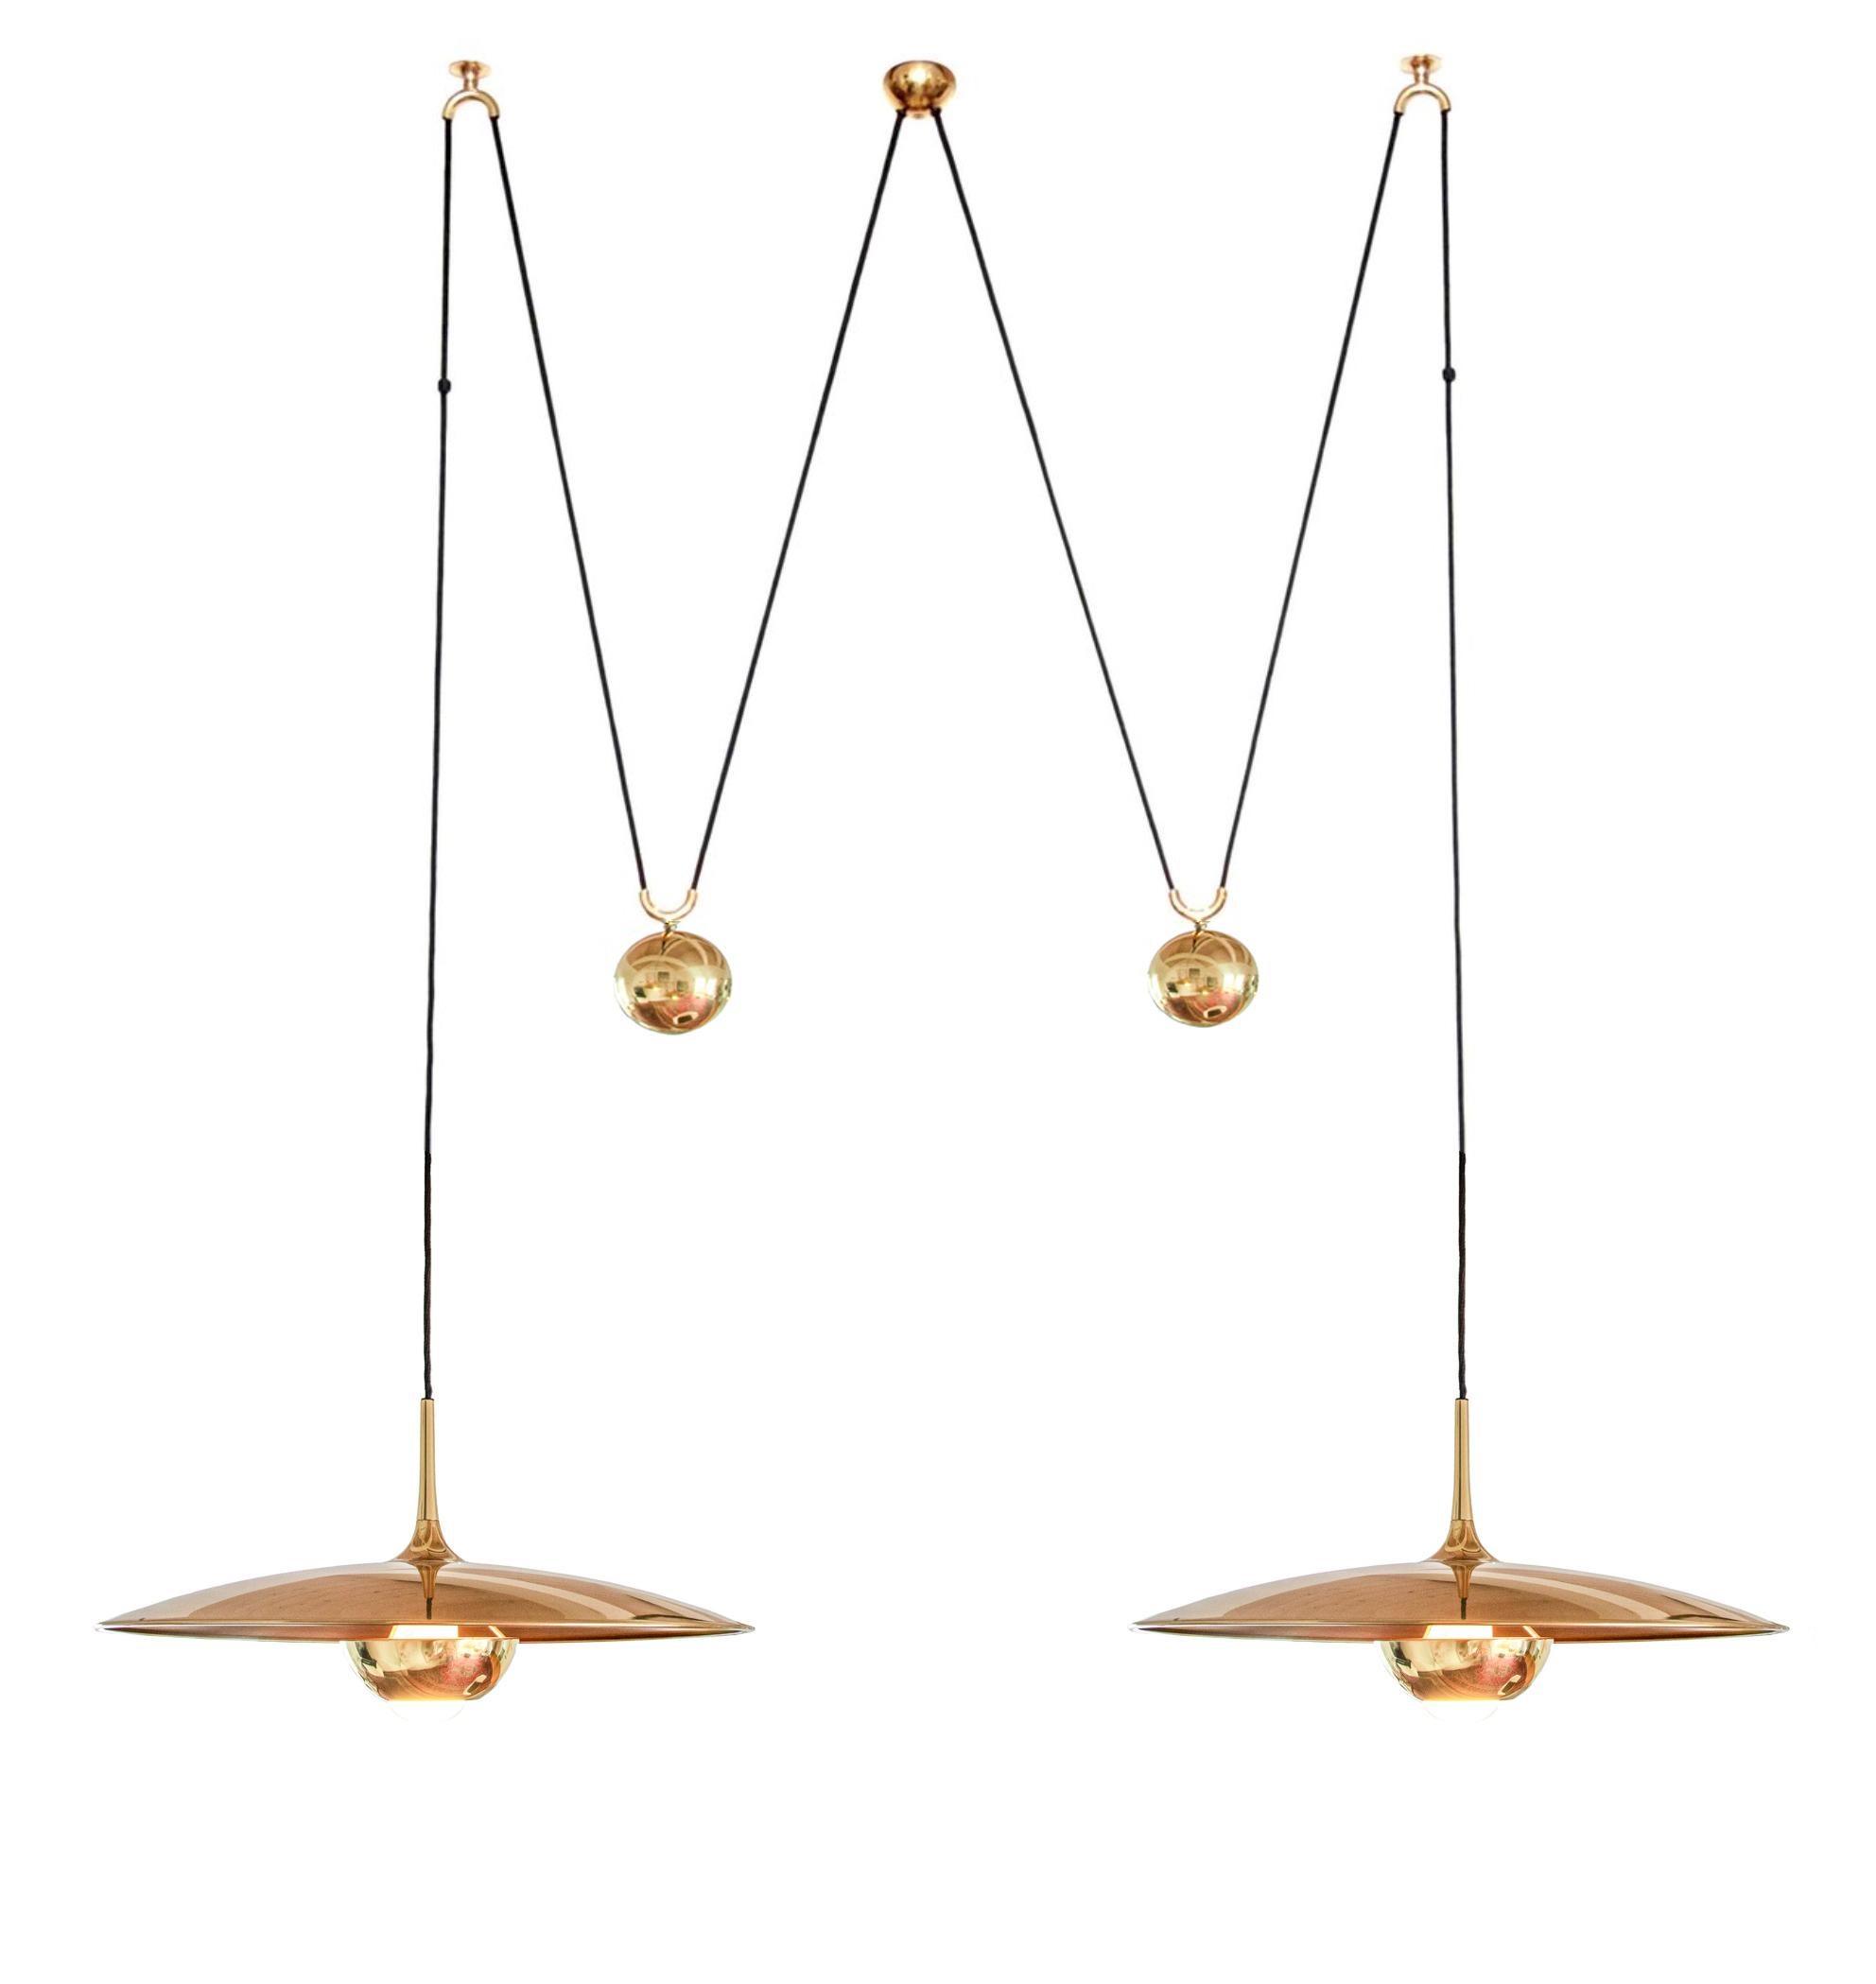 Adjustable suspension DOUBLE ONOS 55 by Florian Schulz / Licht und Objekt made in Germany in the 1970s. Made for the eternity! 

The polished brass lamp is well-constructed and of extremely high quality (made in Germany) and, despite series